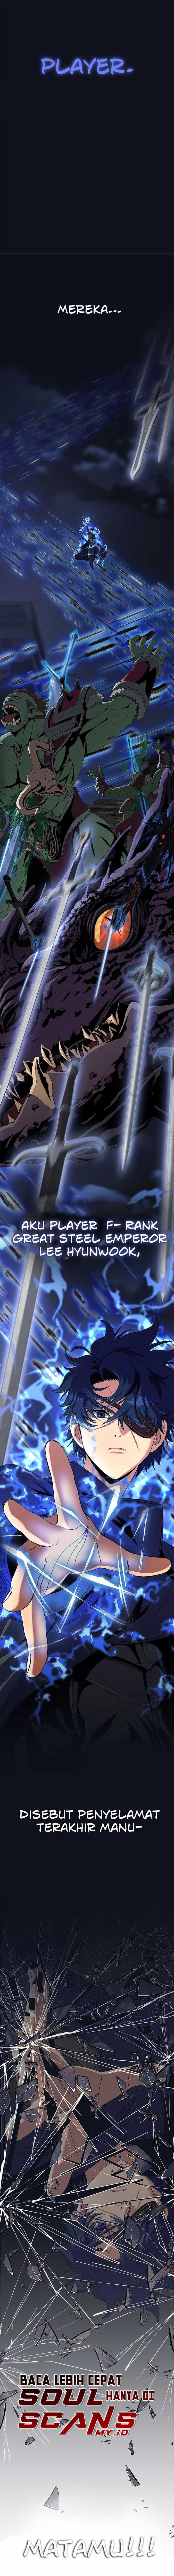 Steel-Eating Player Chapter 01